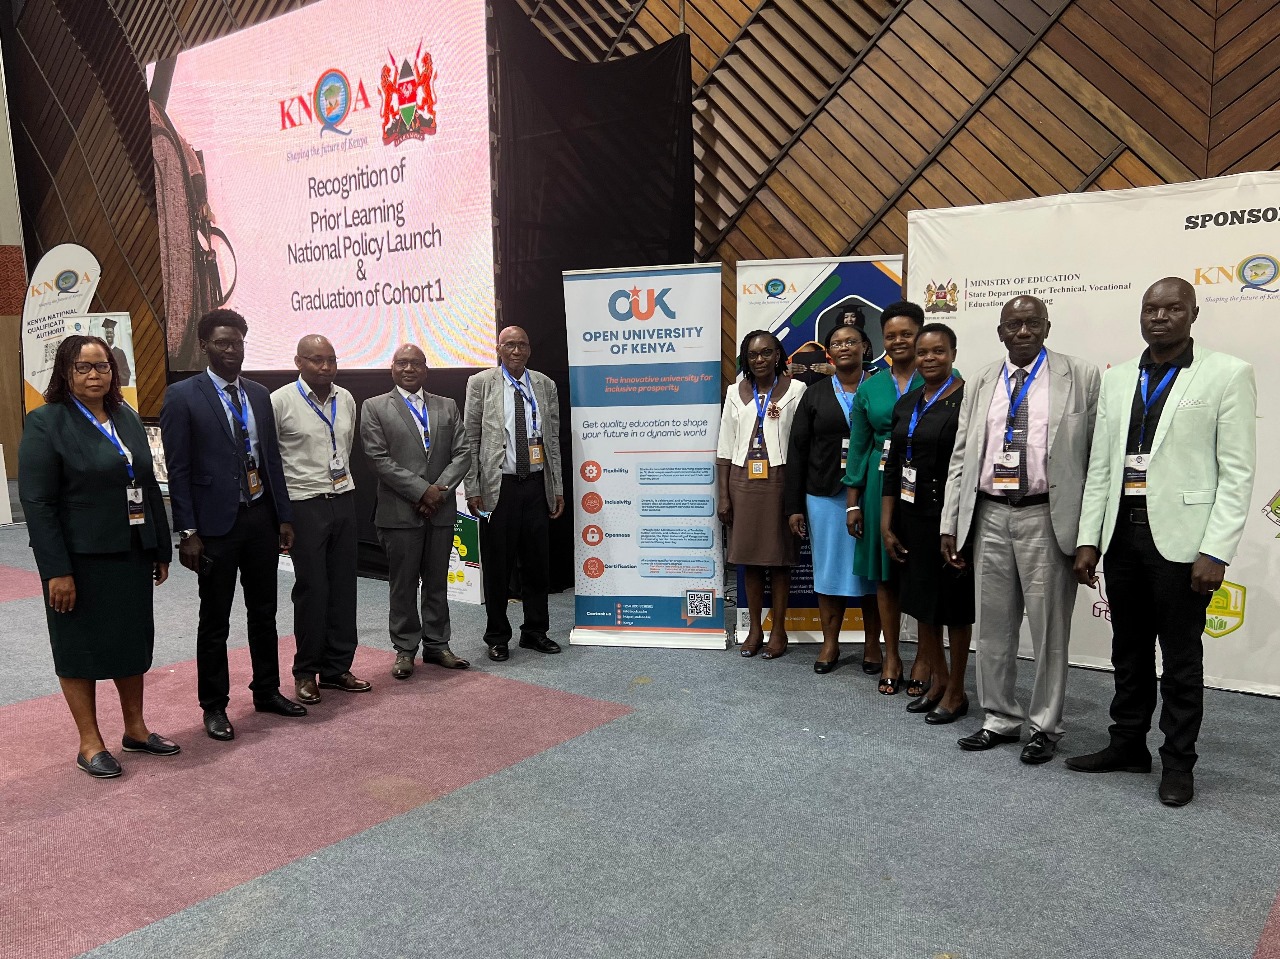 Chair of Council and VC leads the OUK Team at Official Launch of the Recognition of Prior Learning Policy Framework by Kenya National Qualifications Authority at KICC Nairobi. Quick assignment: